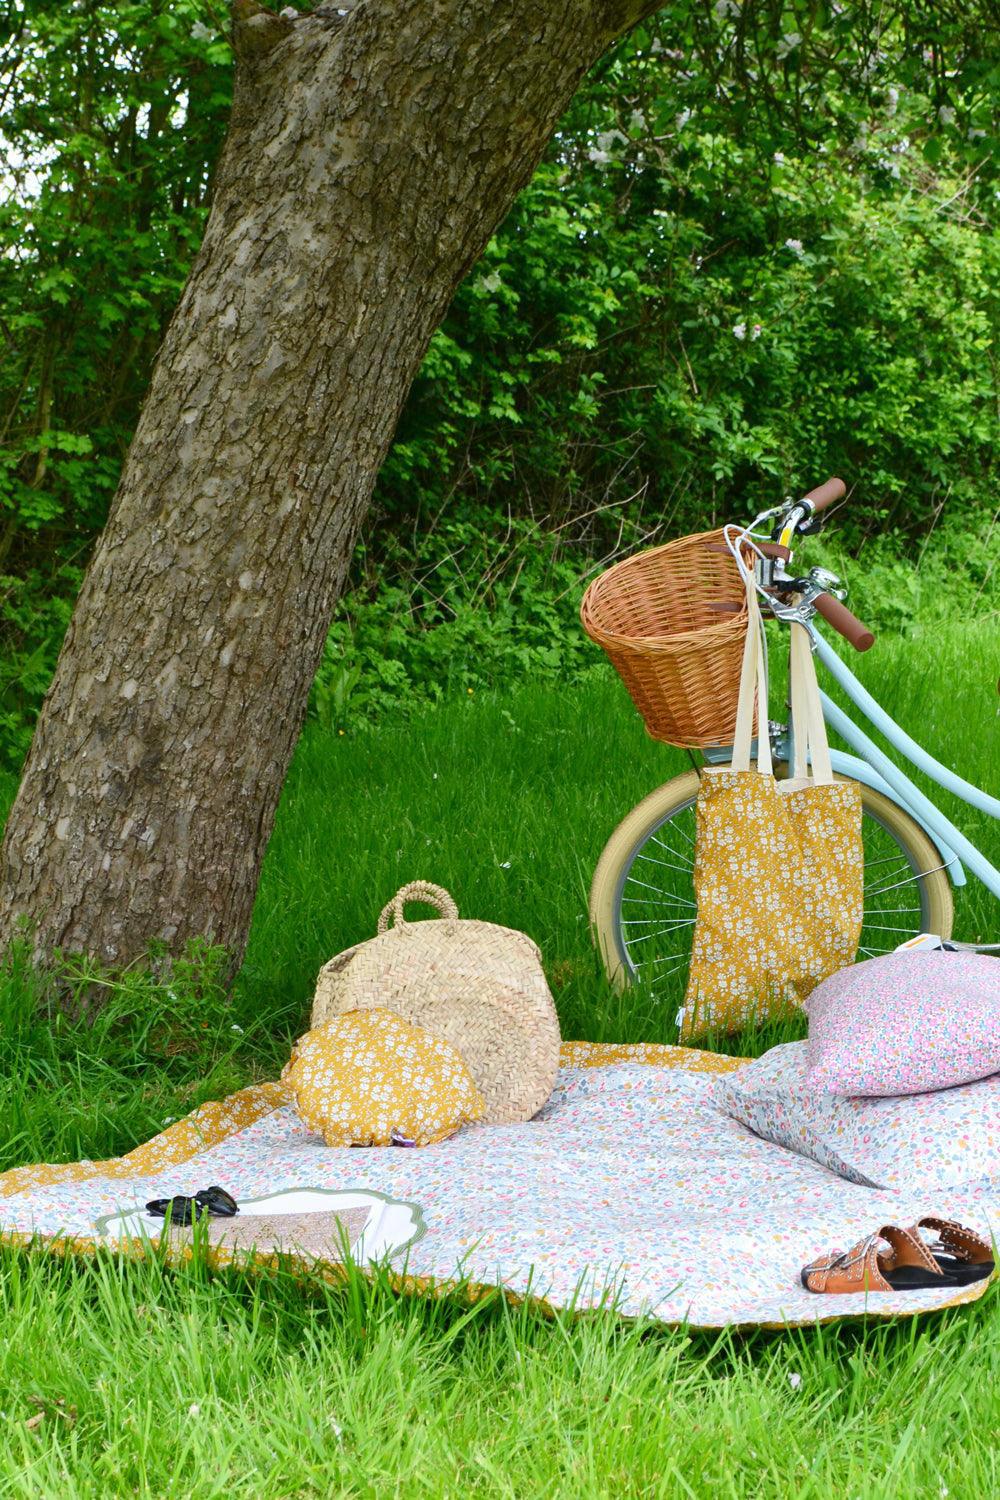 Picnic Blanket made with Liberty Fabric BETSY GREY & CAPEL MUSTARD - Coco & Wolf